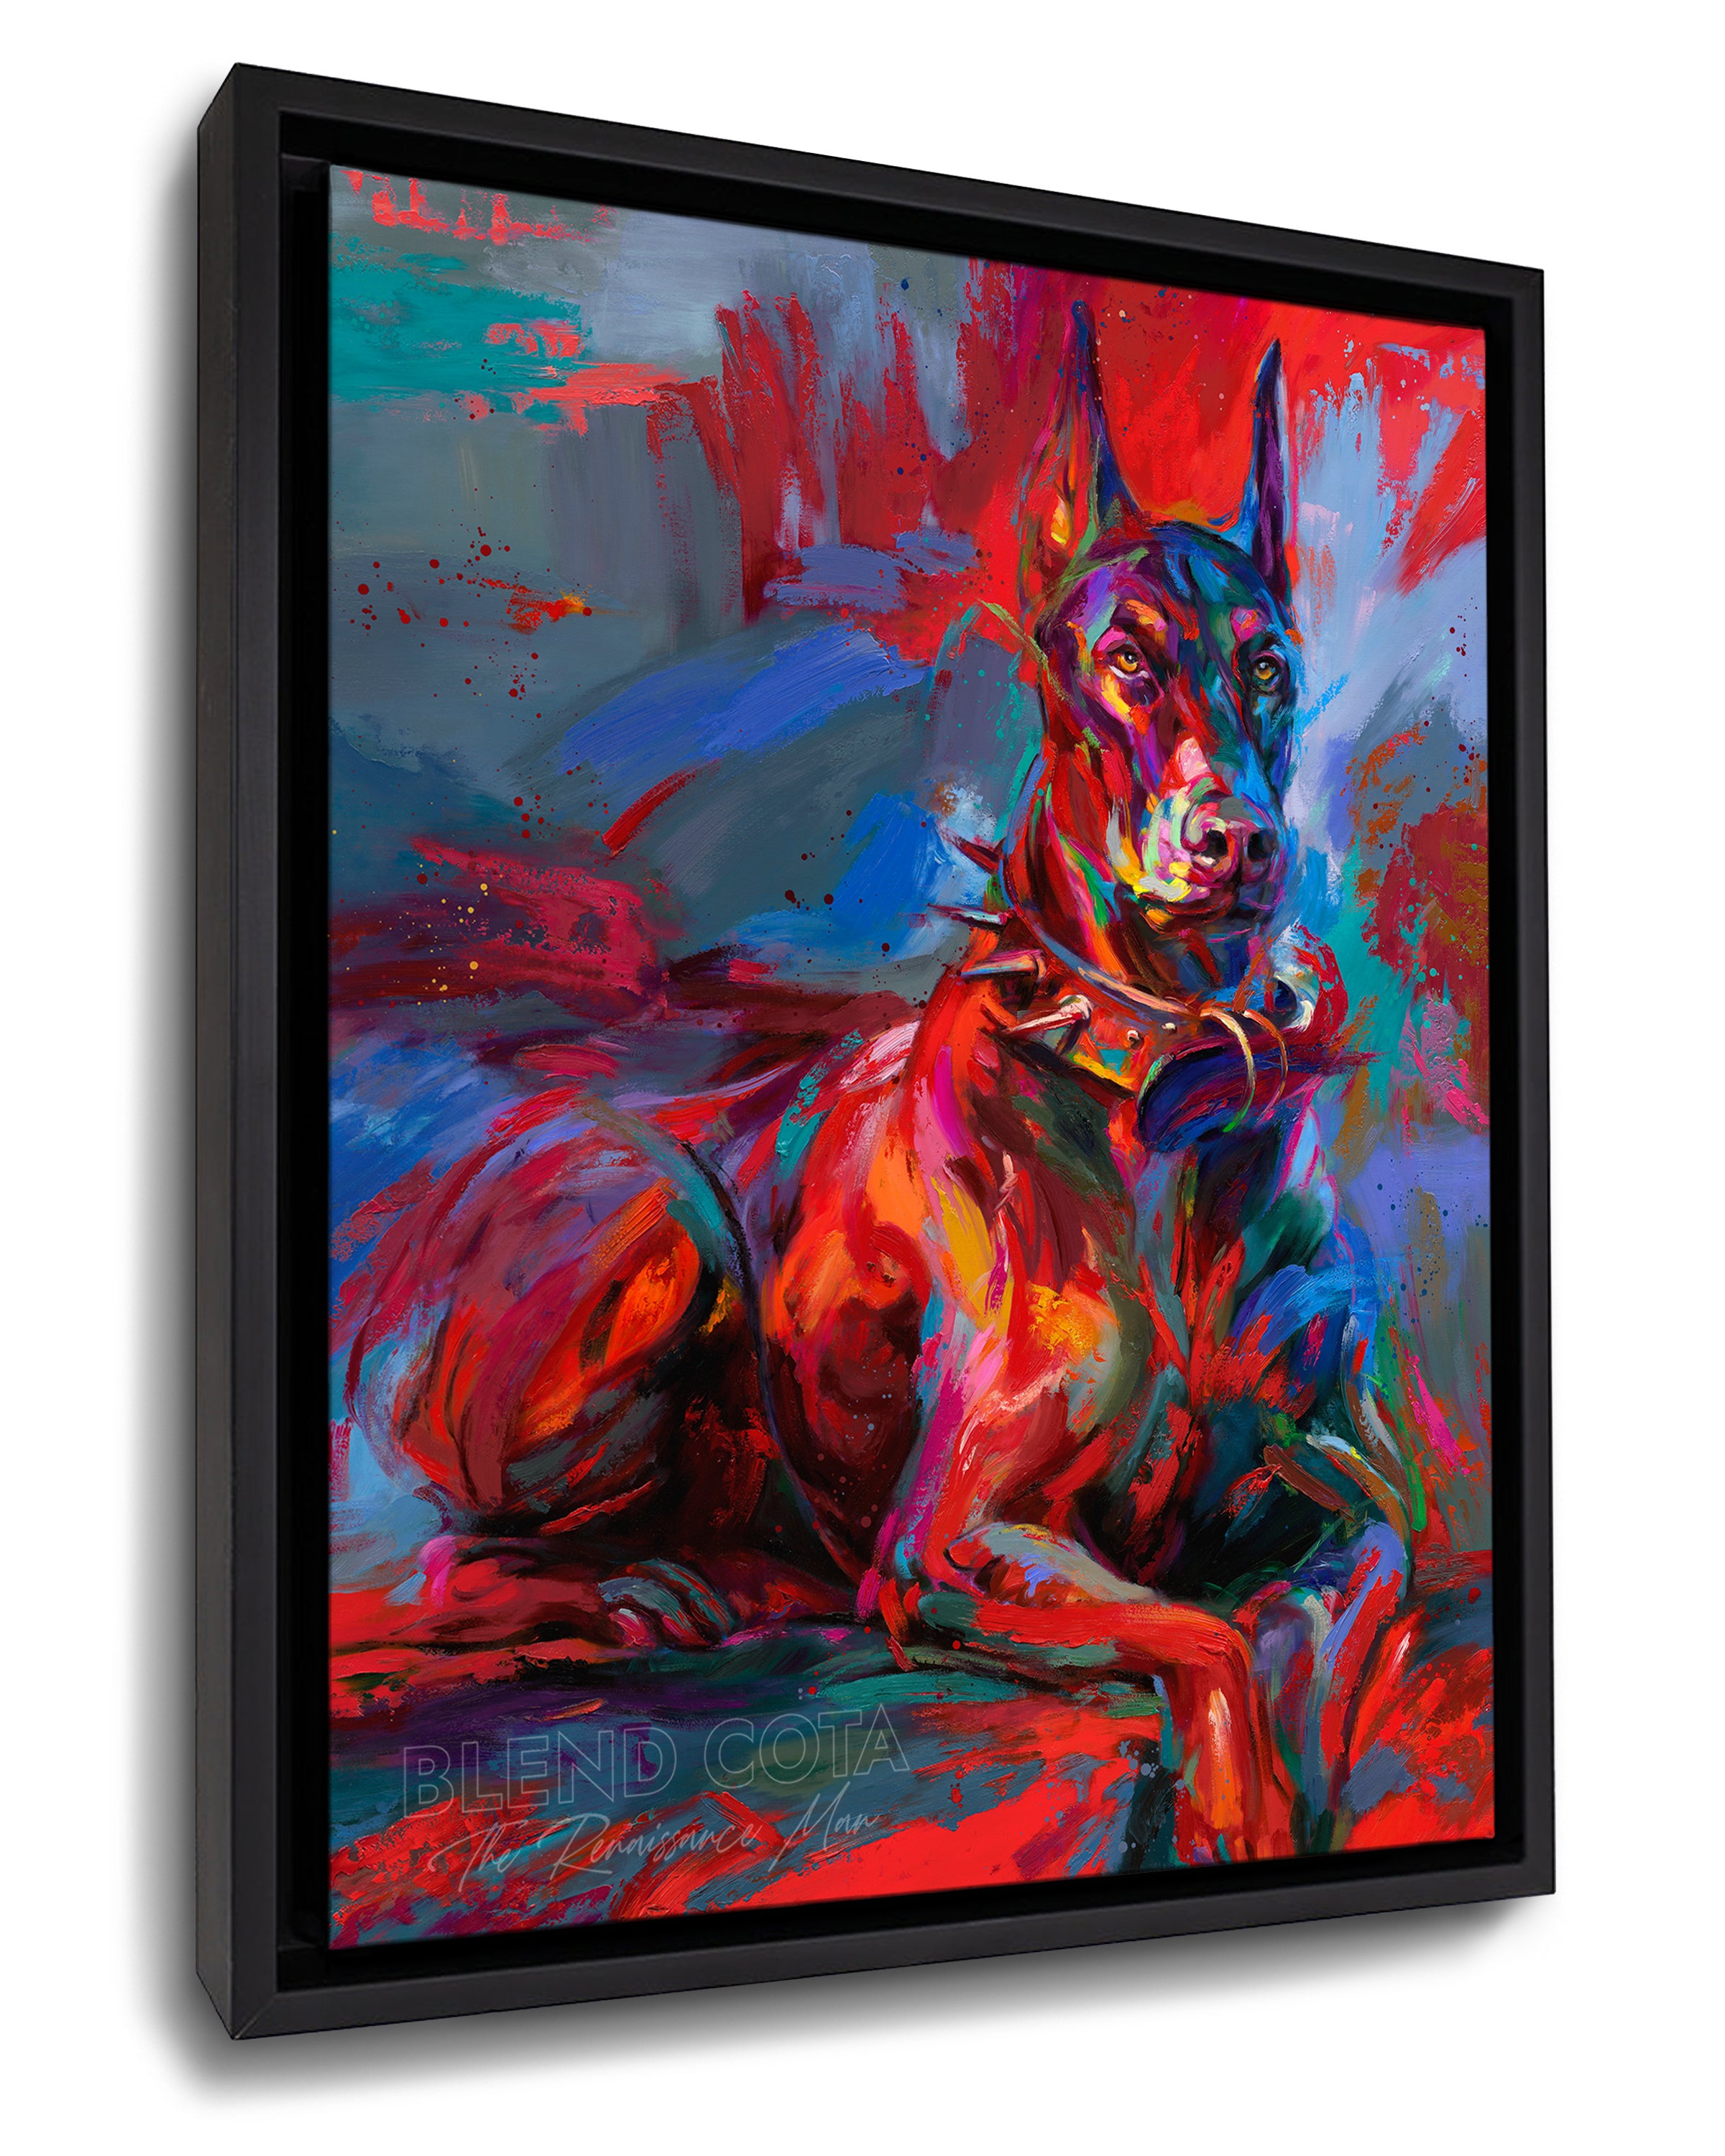 Framed art print on canvas of the pet Doberman Apollo, a royal breed of dog, tough, brave and affectionate, guarding those he loves, in colorful brushstrokes, color expressionism style.